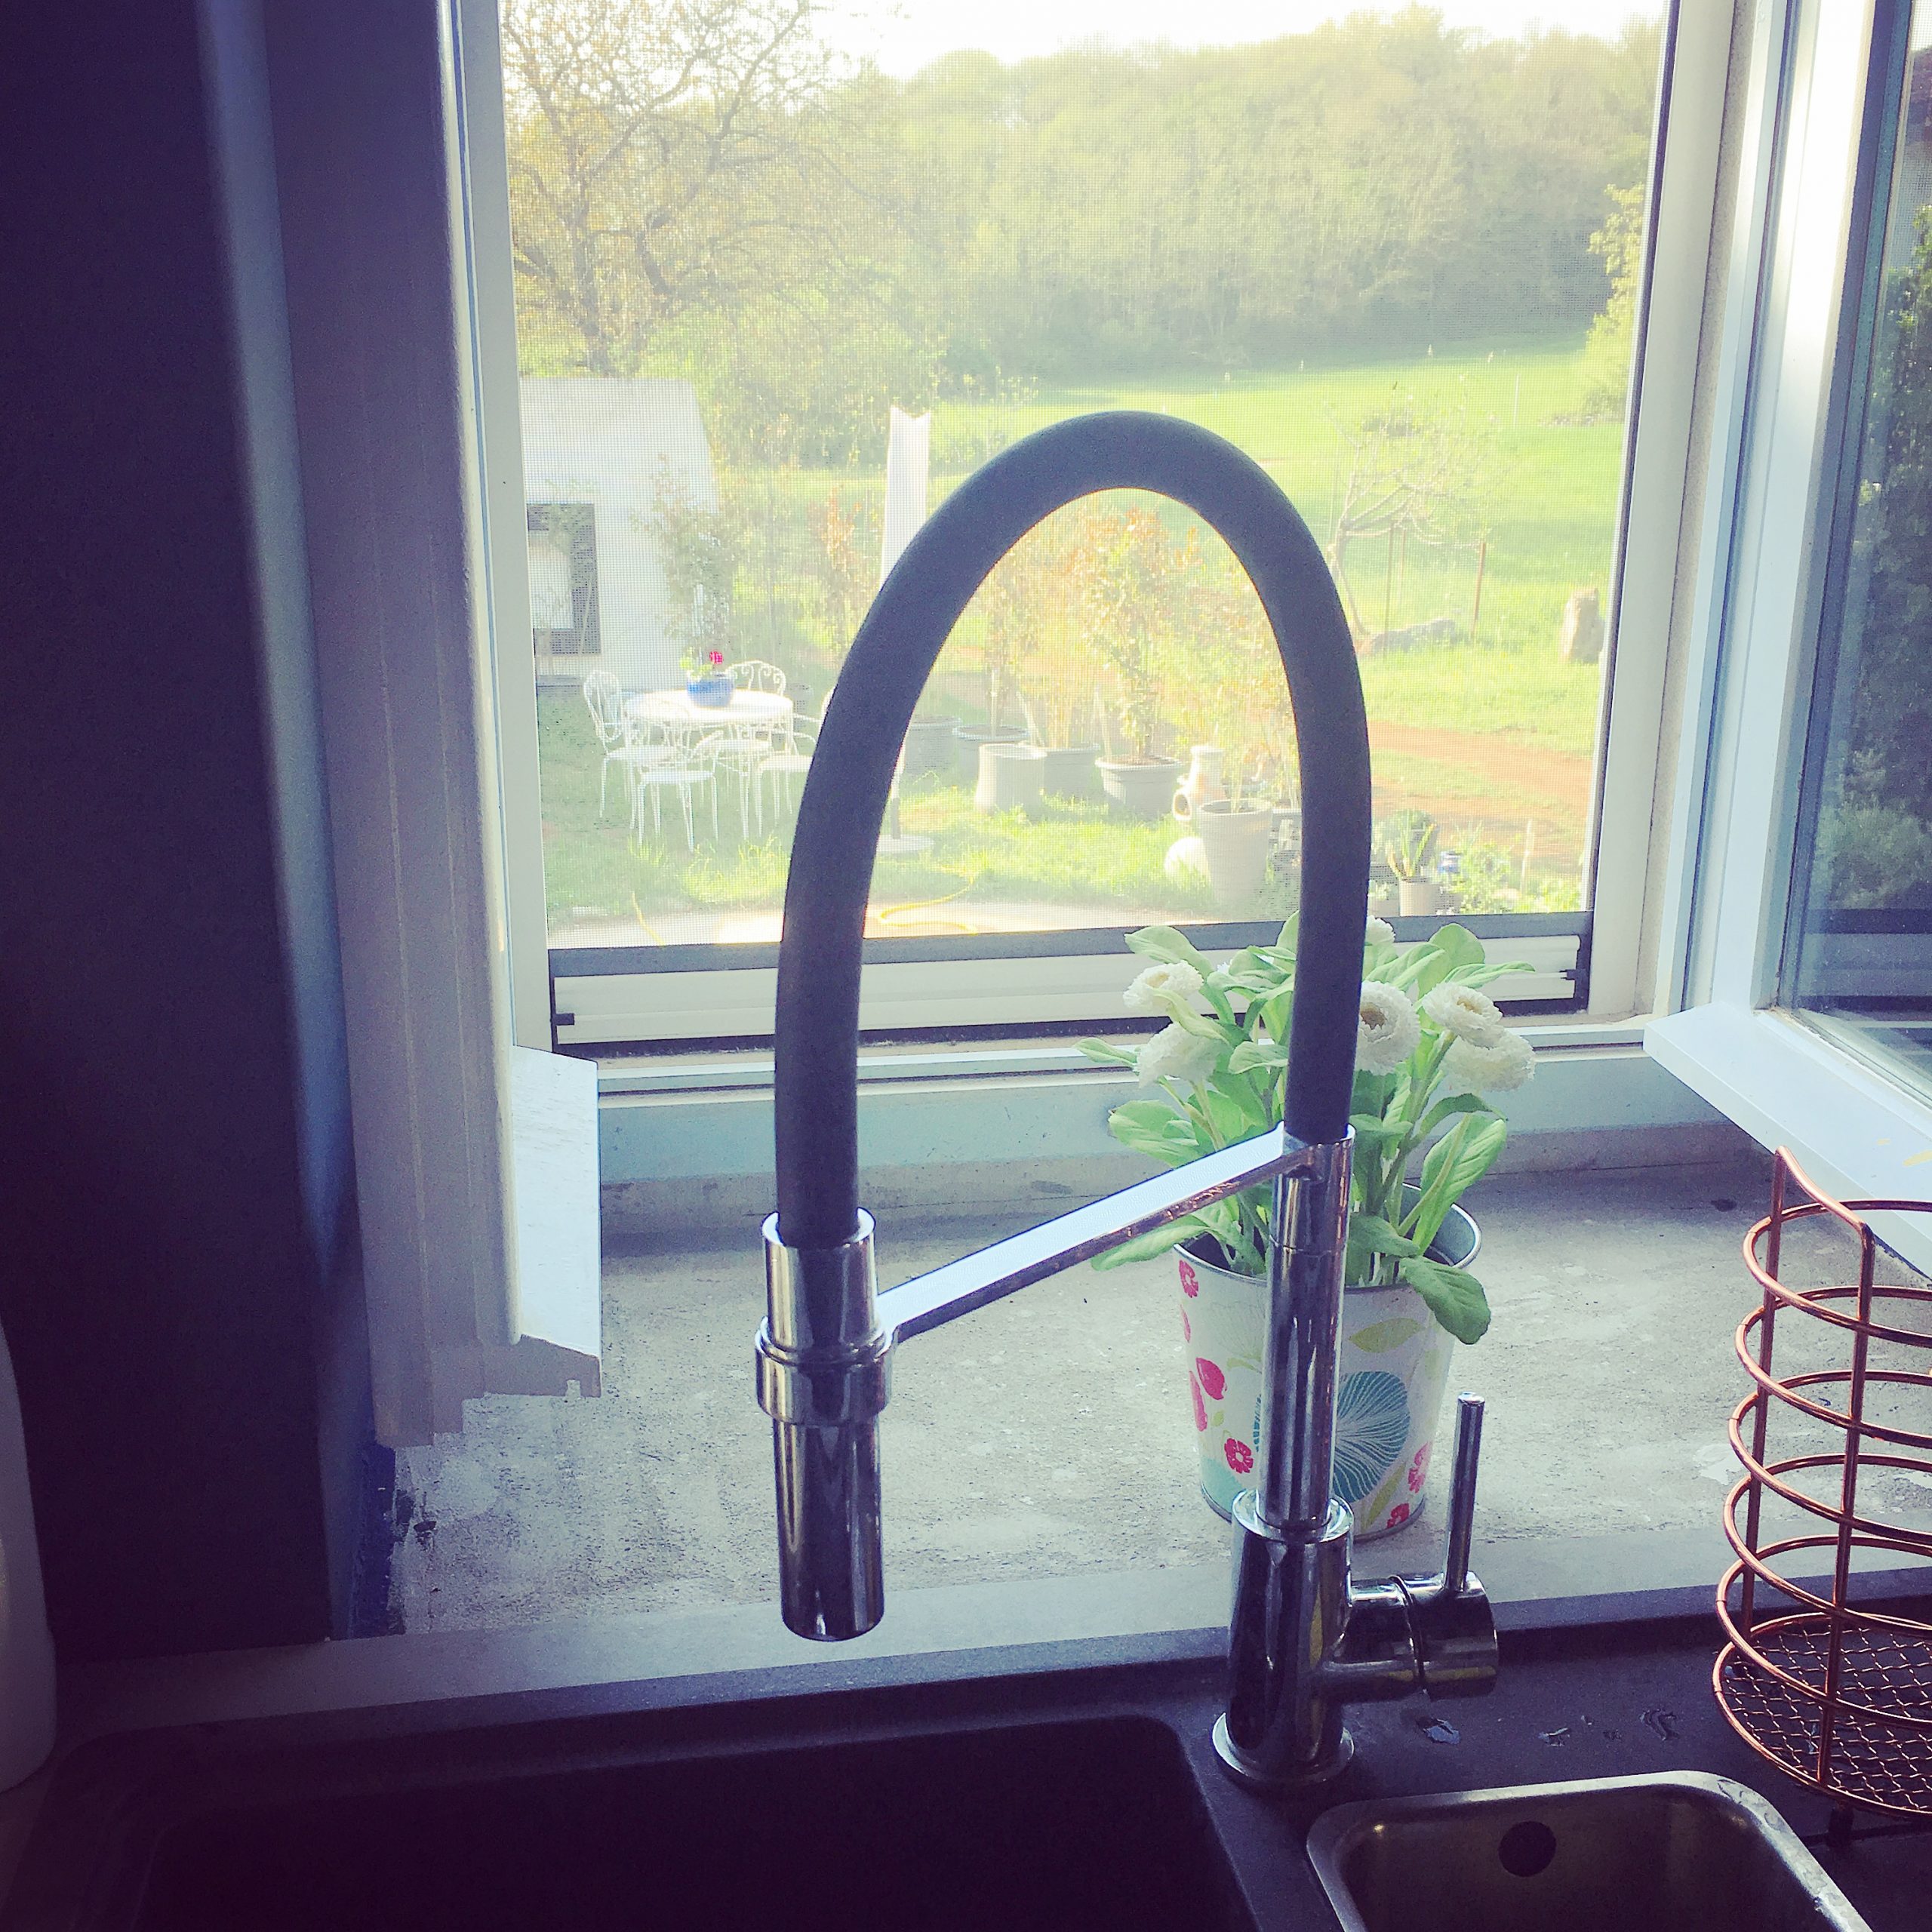 Ignore the unfinished, because we finally have a tap!